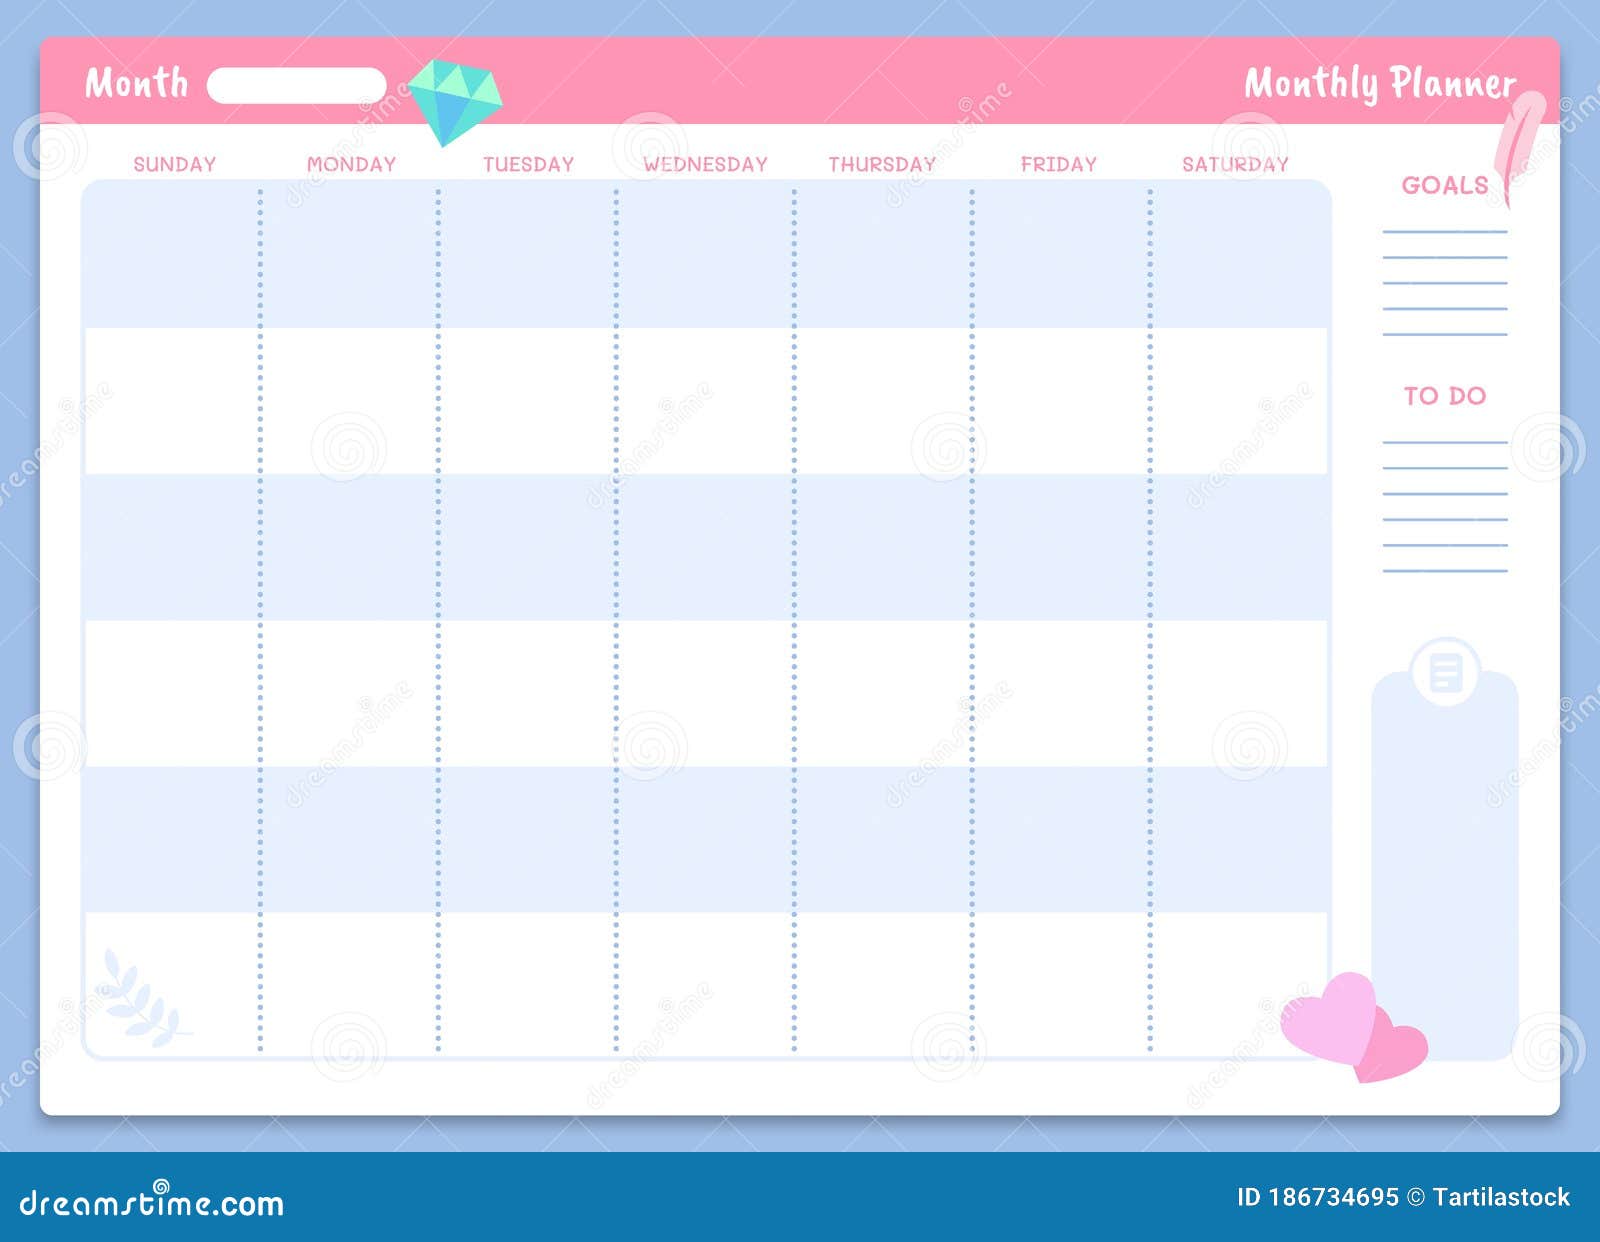 Monthly Scheduling Calendar Template from thumbs.dreamstime.com